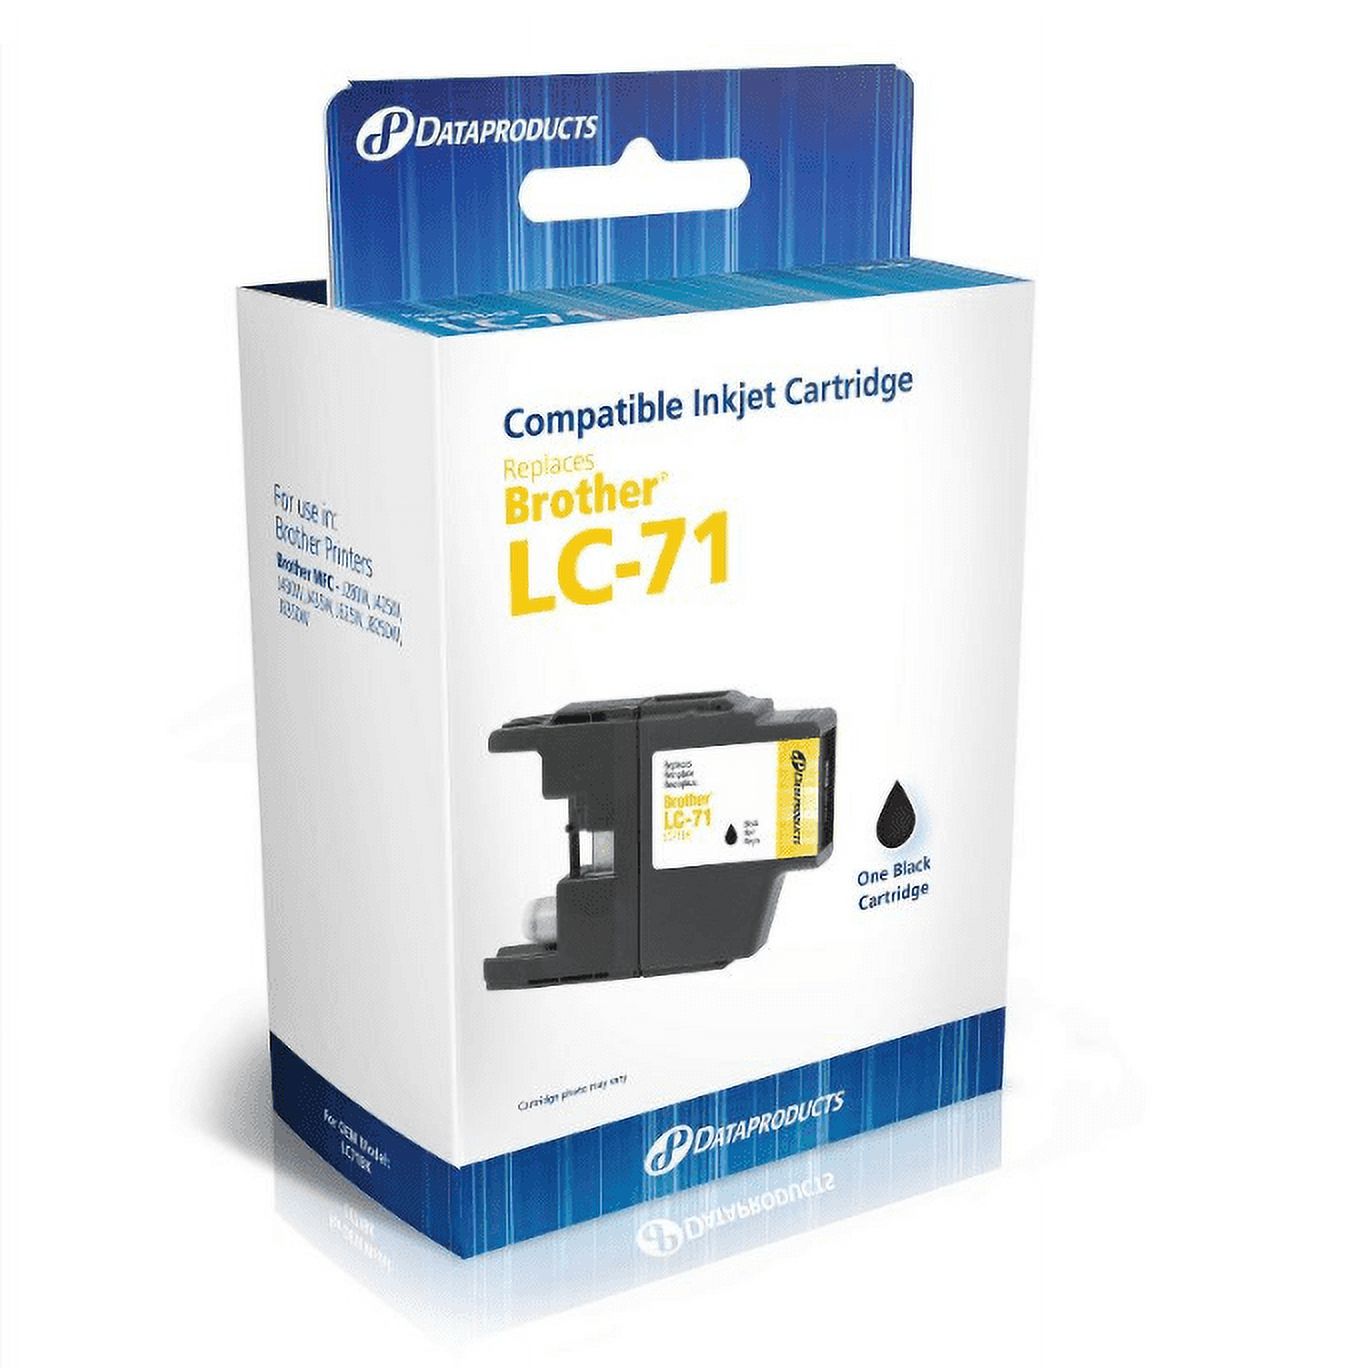 Dataproducts Standard Ink Cartridge Compatible with Brother LC 71 Series, Black - image 1 of 3